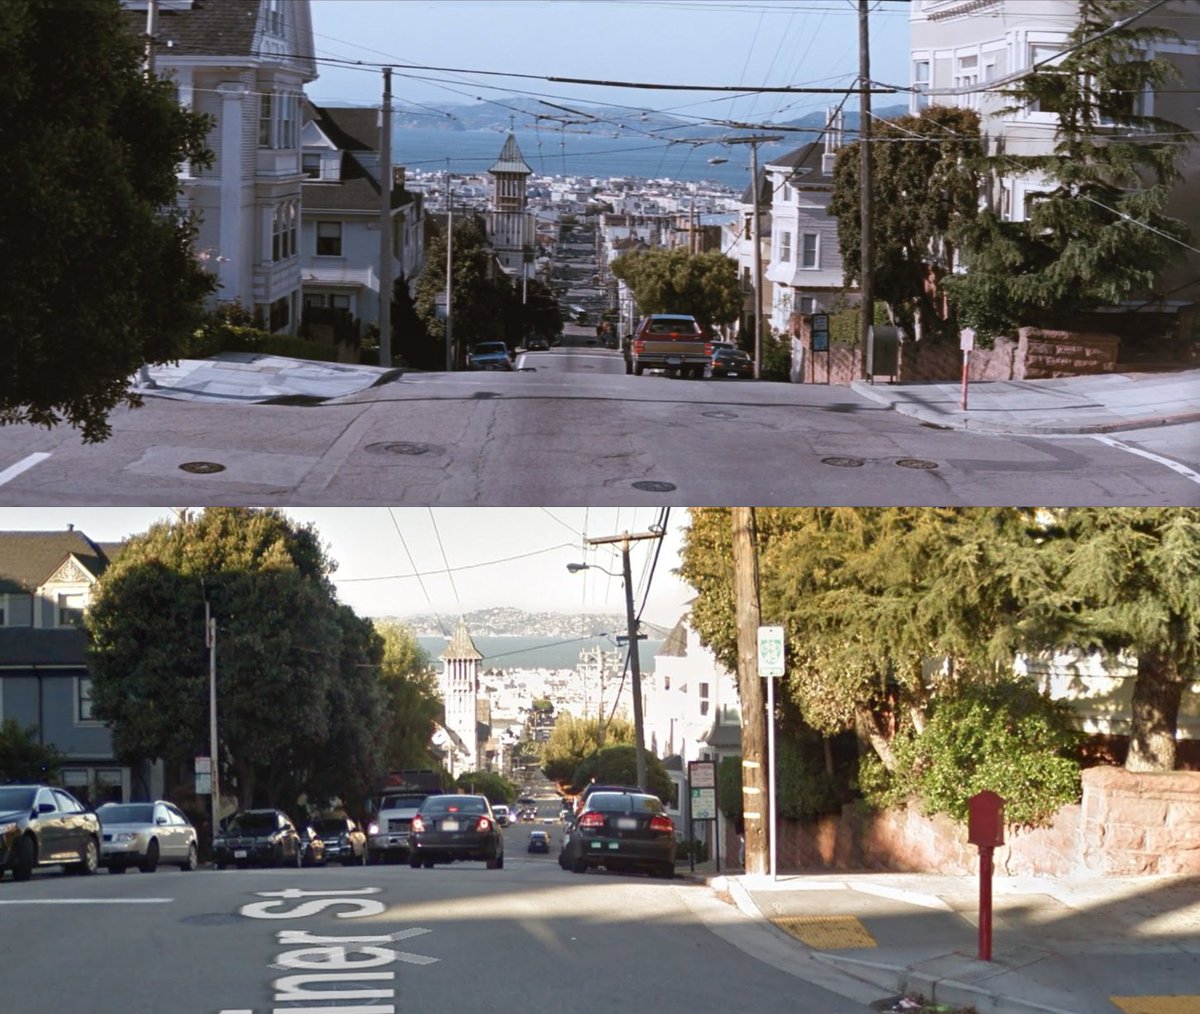 I'll leave it to the viewer to decide if the inside has changed more than the outside, but there are definitely lots of things on this street that look the same as they did 27 years ago.